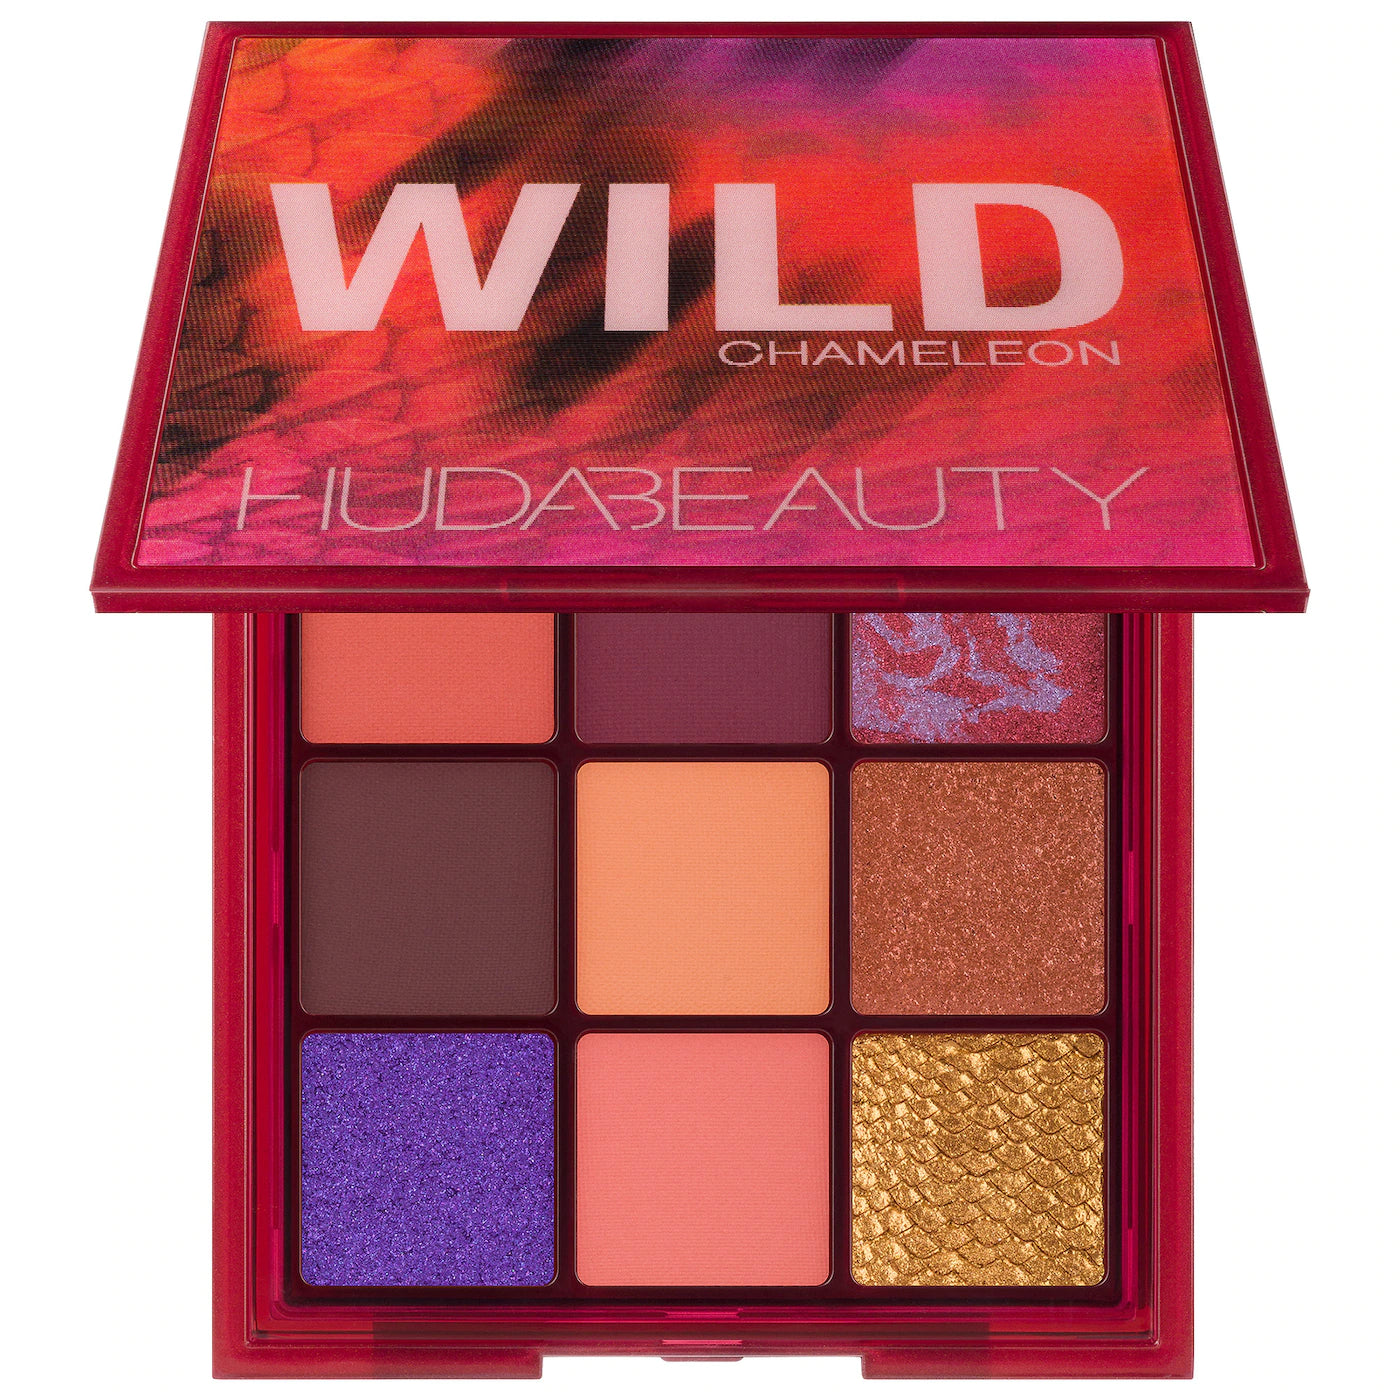 Huda Beauty - Wild Obsessions Eyeshadow Palette - Chameleon – Beautique